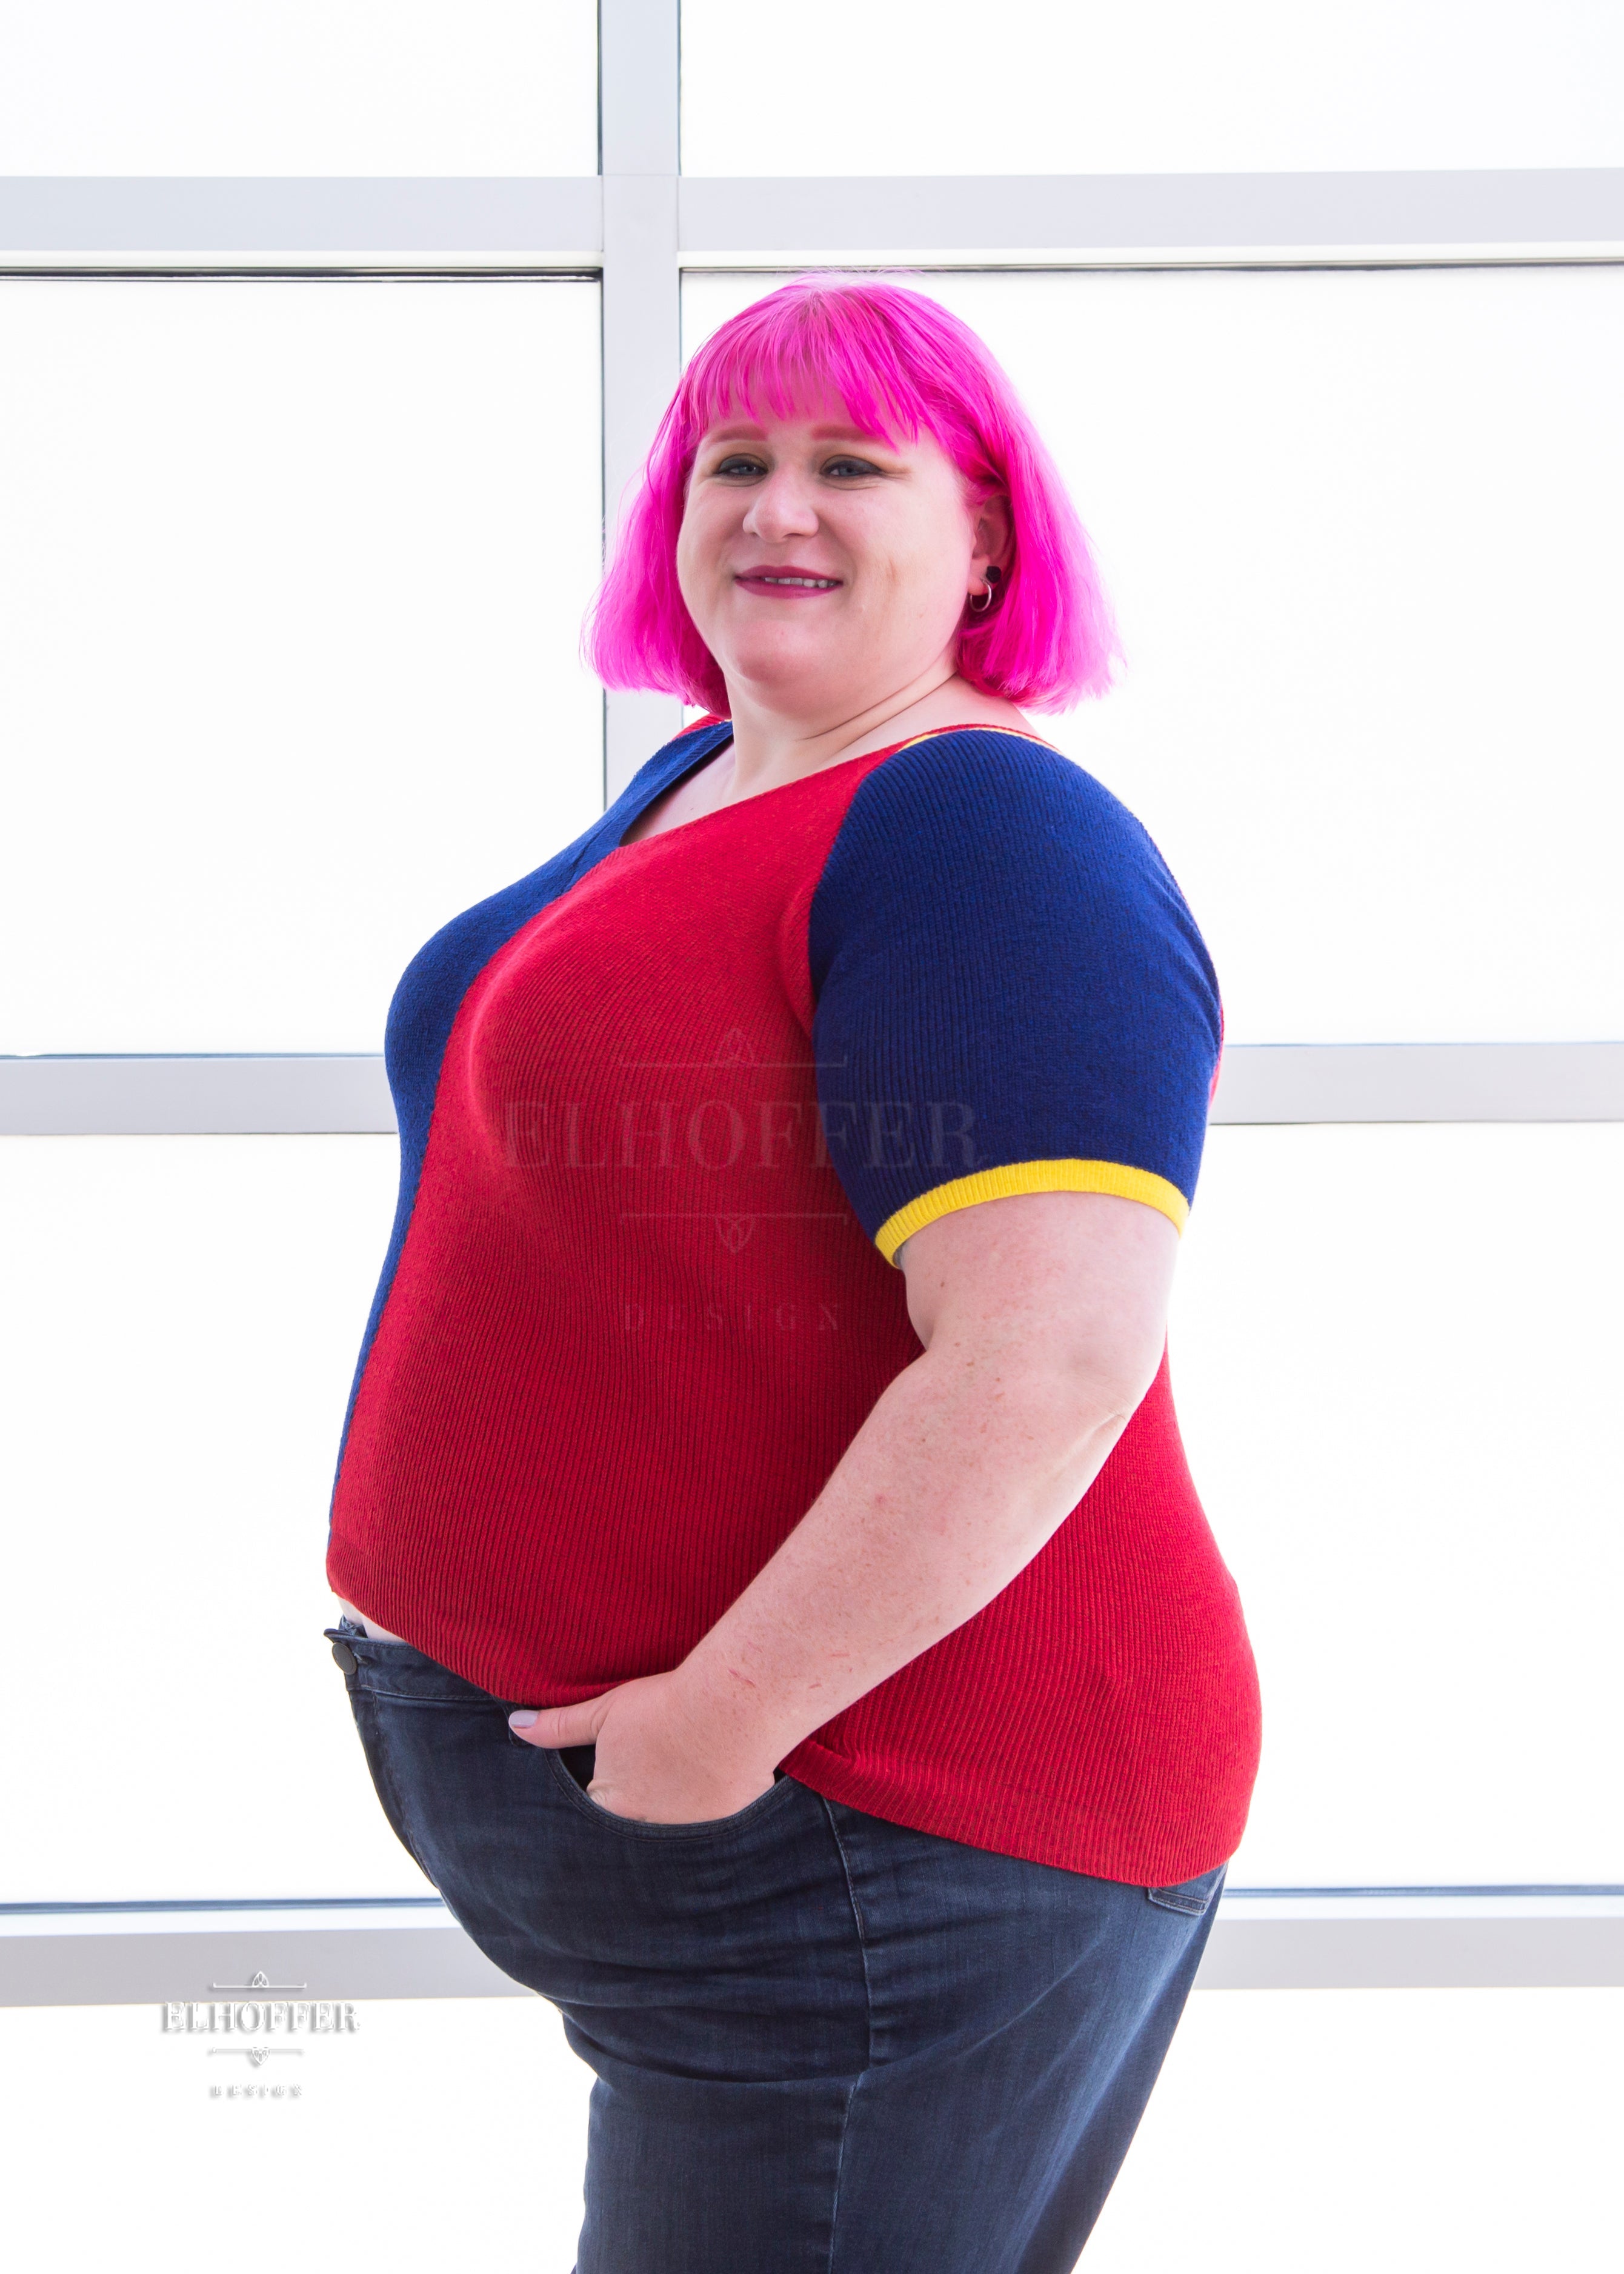 A side view of Logan, a fair skinned 3xl model with short pink hair with bangs, wearing a short sleeve knit top with alternating blue and red colors. There is yellow detailing along the top of the shoulder and around the cuff of the sleeve.